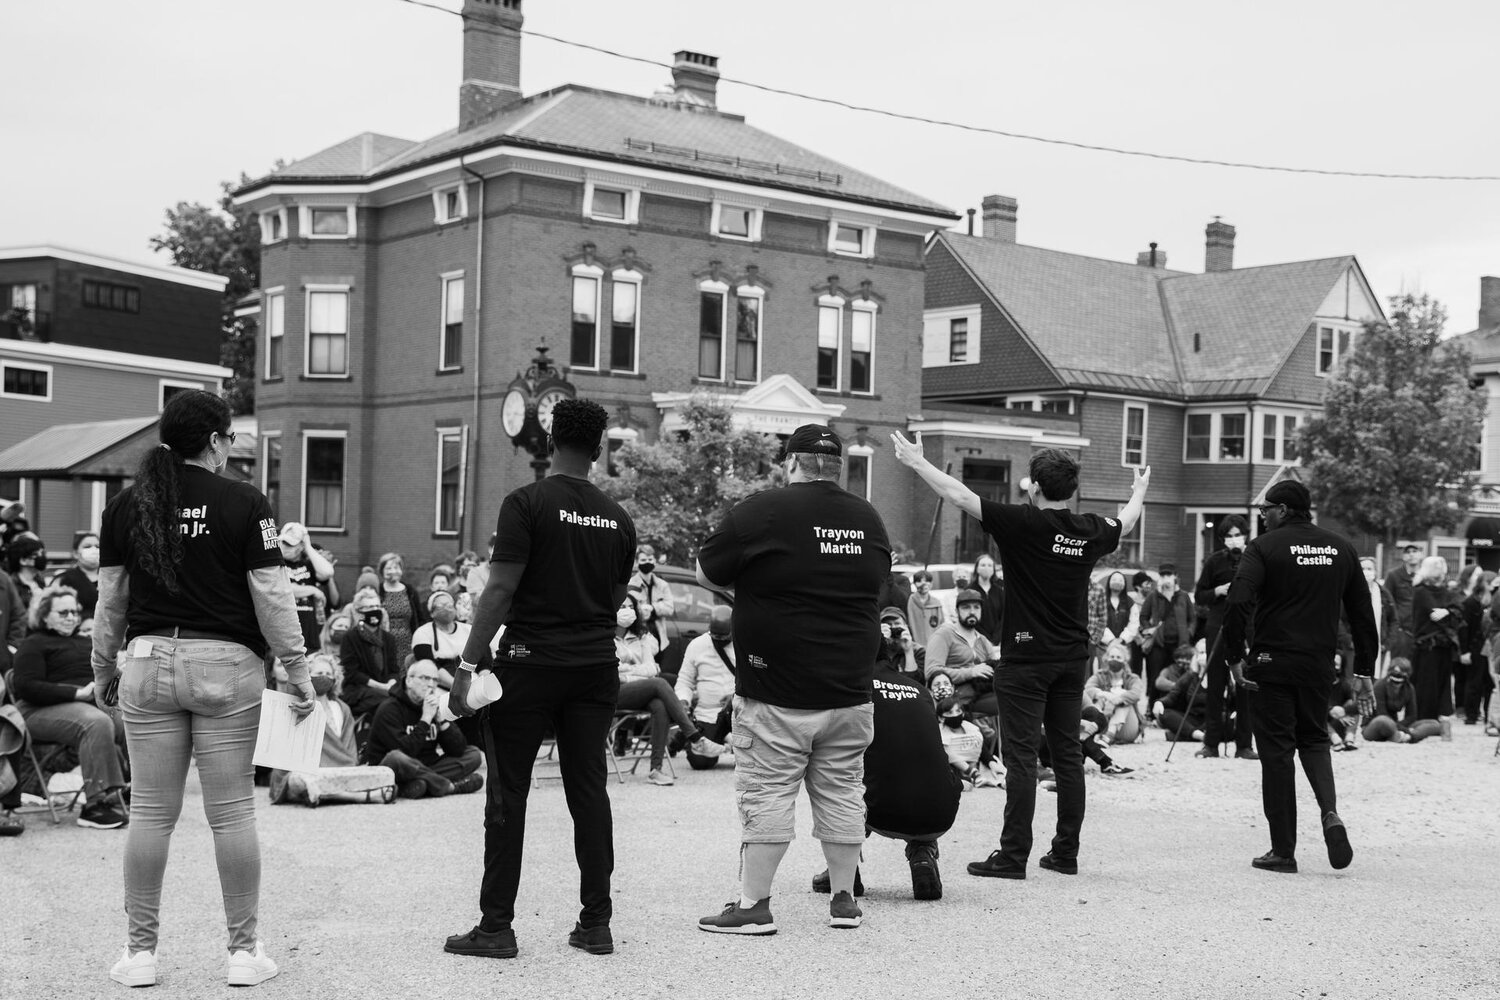 The cast of The Weeping City performs at A Day of Remembrance in Portland, ME on May 25, 2021. From left to right: Stacy Perez, Abdul Ali, Tyler Jackson, Adan Abdi, Noah Bragg and Joseph Jackson. Shirts printed by Little Chair Printing. Photograph by Henry Ametti.